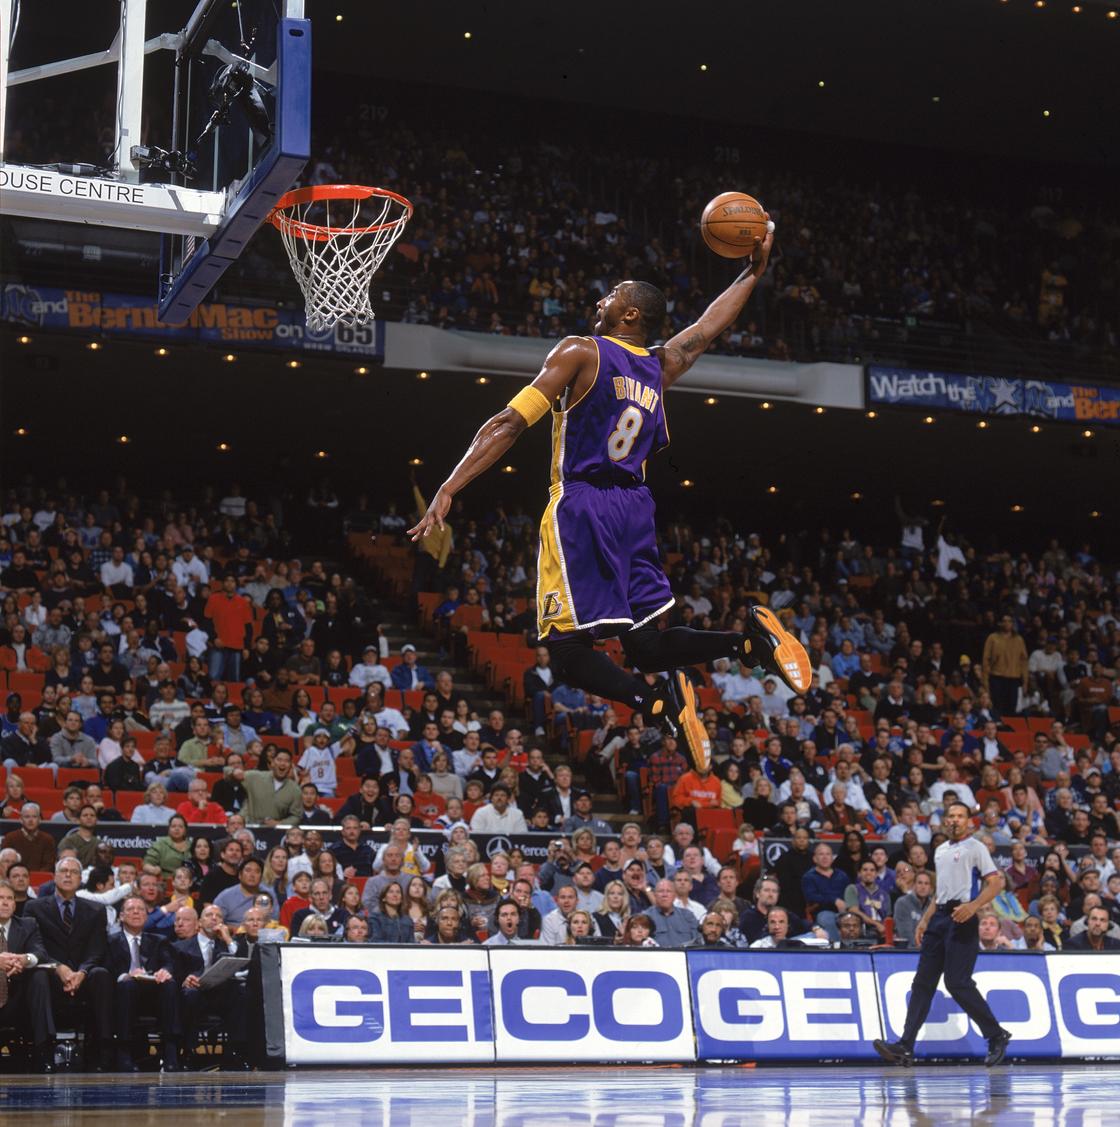 Kobe is one of the top 20 best dunkers all time.